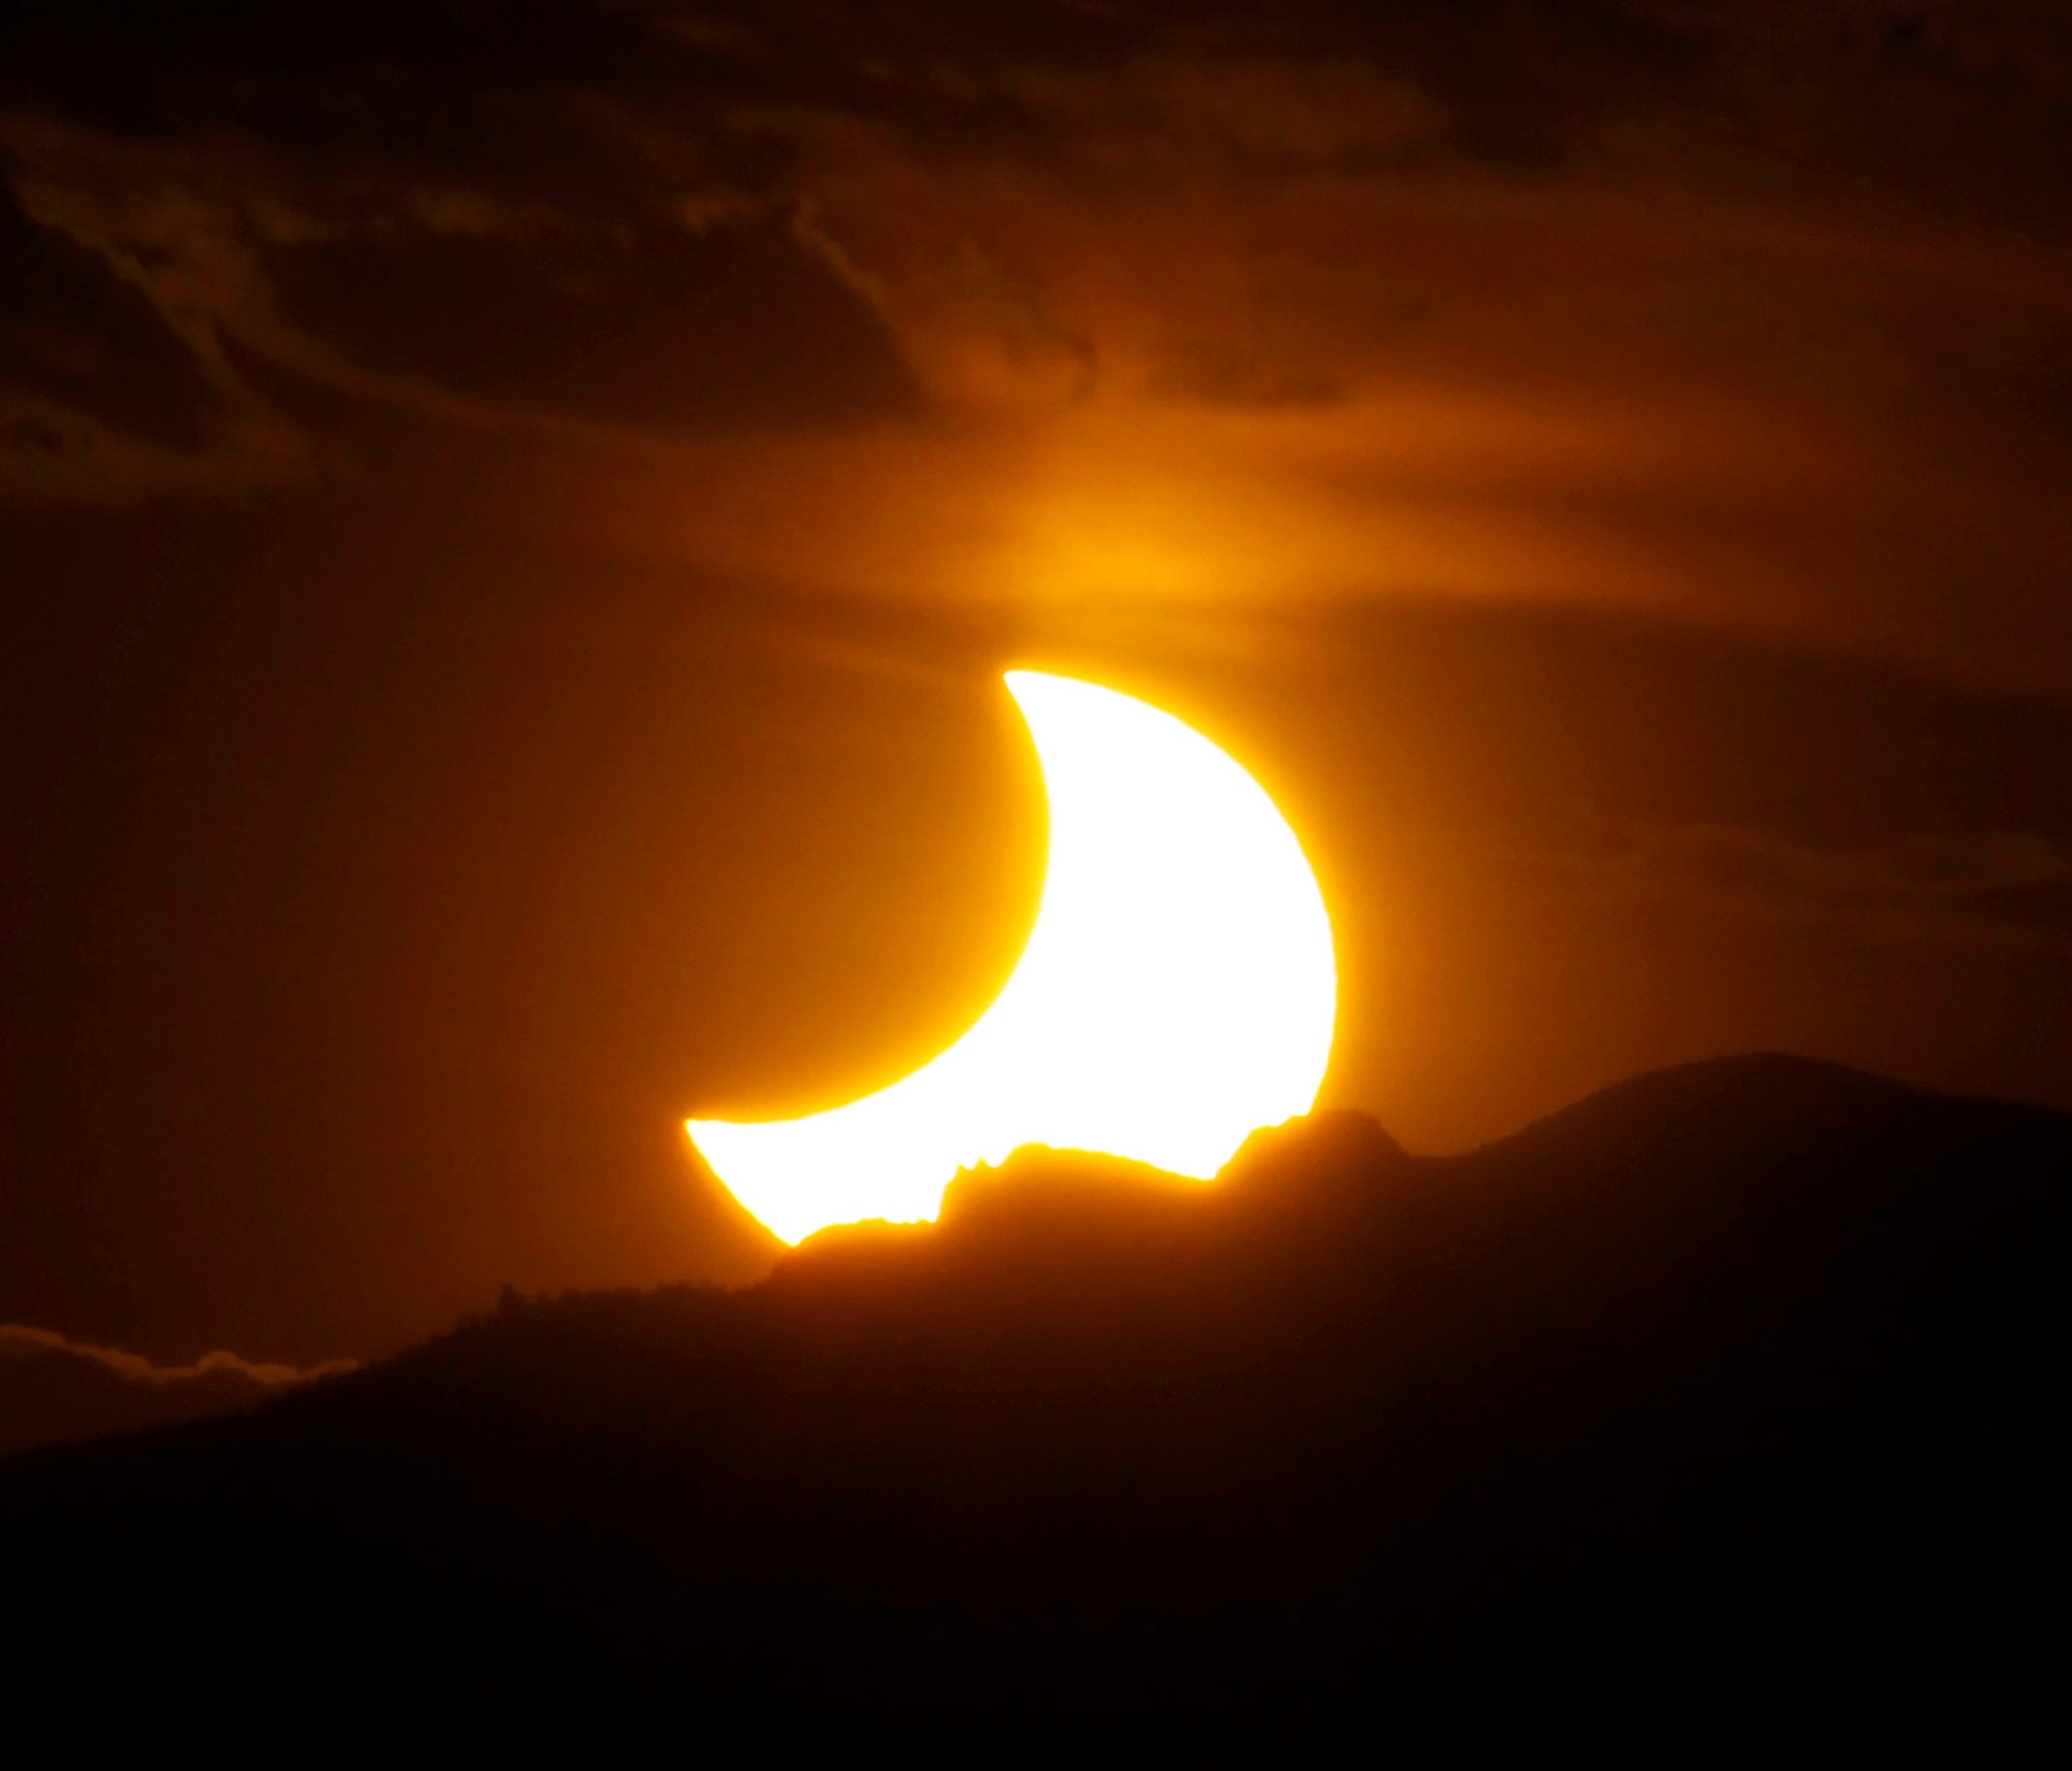 File photo shows 2012 solar eclipse in Denver. The 2017 eclipse will cover a large swath of the continental U.S. and travelers are clamoring to get into its path.